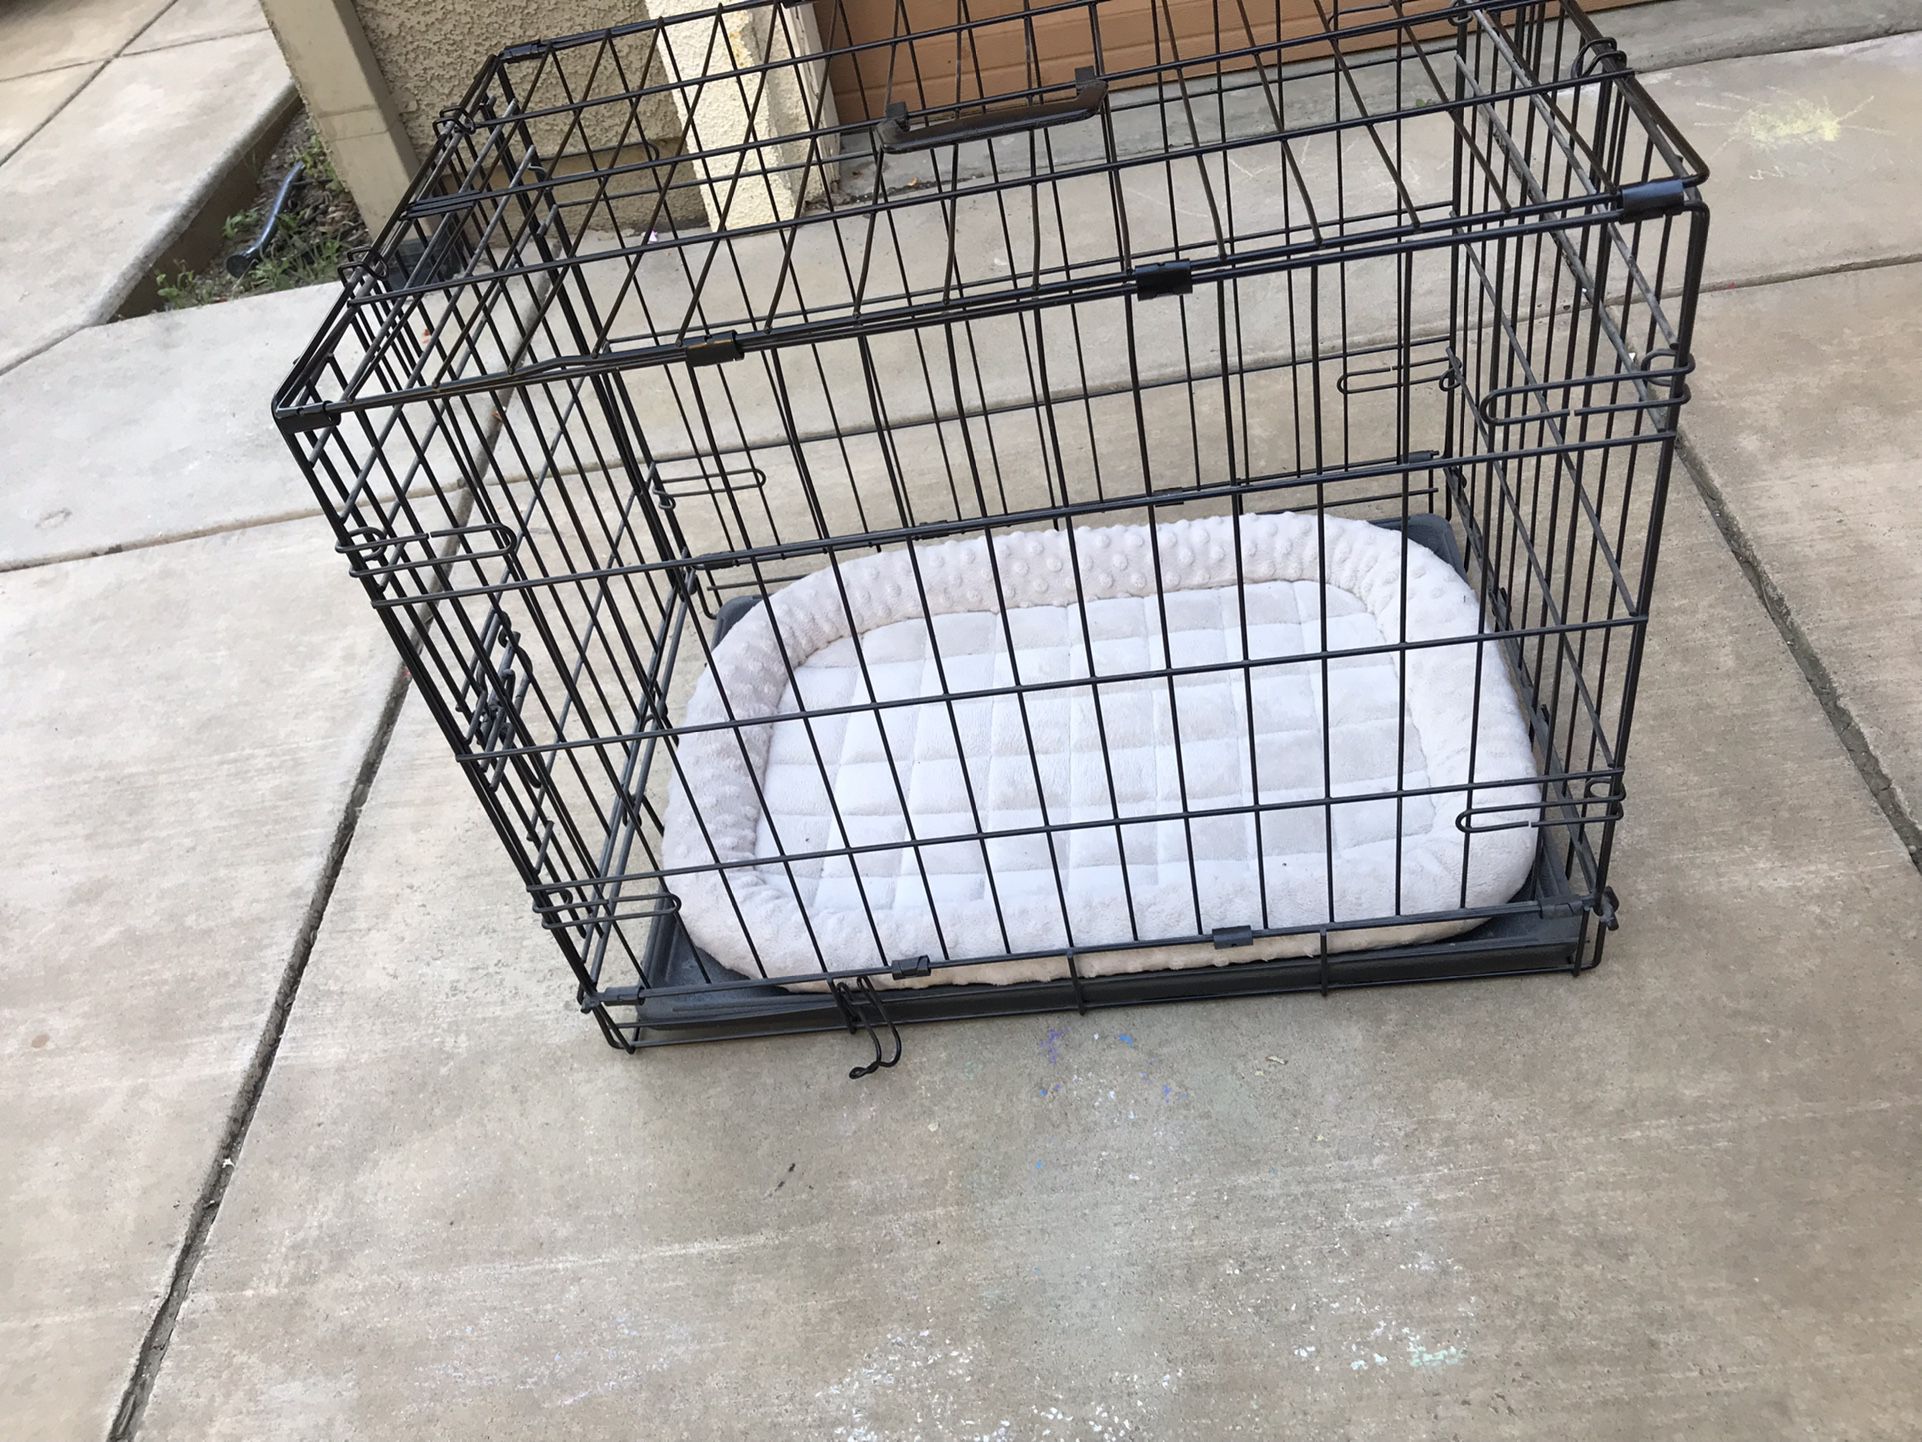 Pet Carrier Cage 